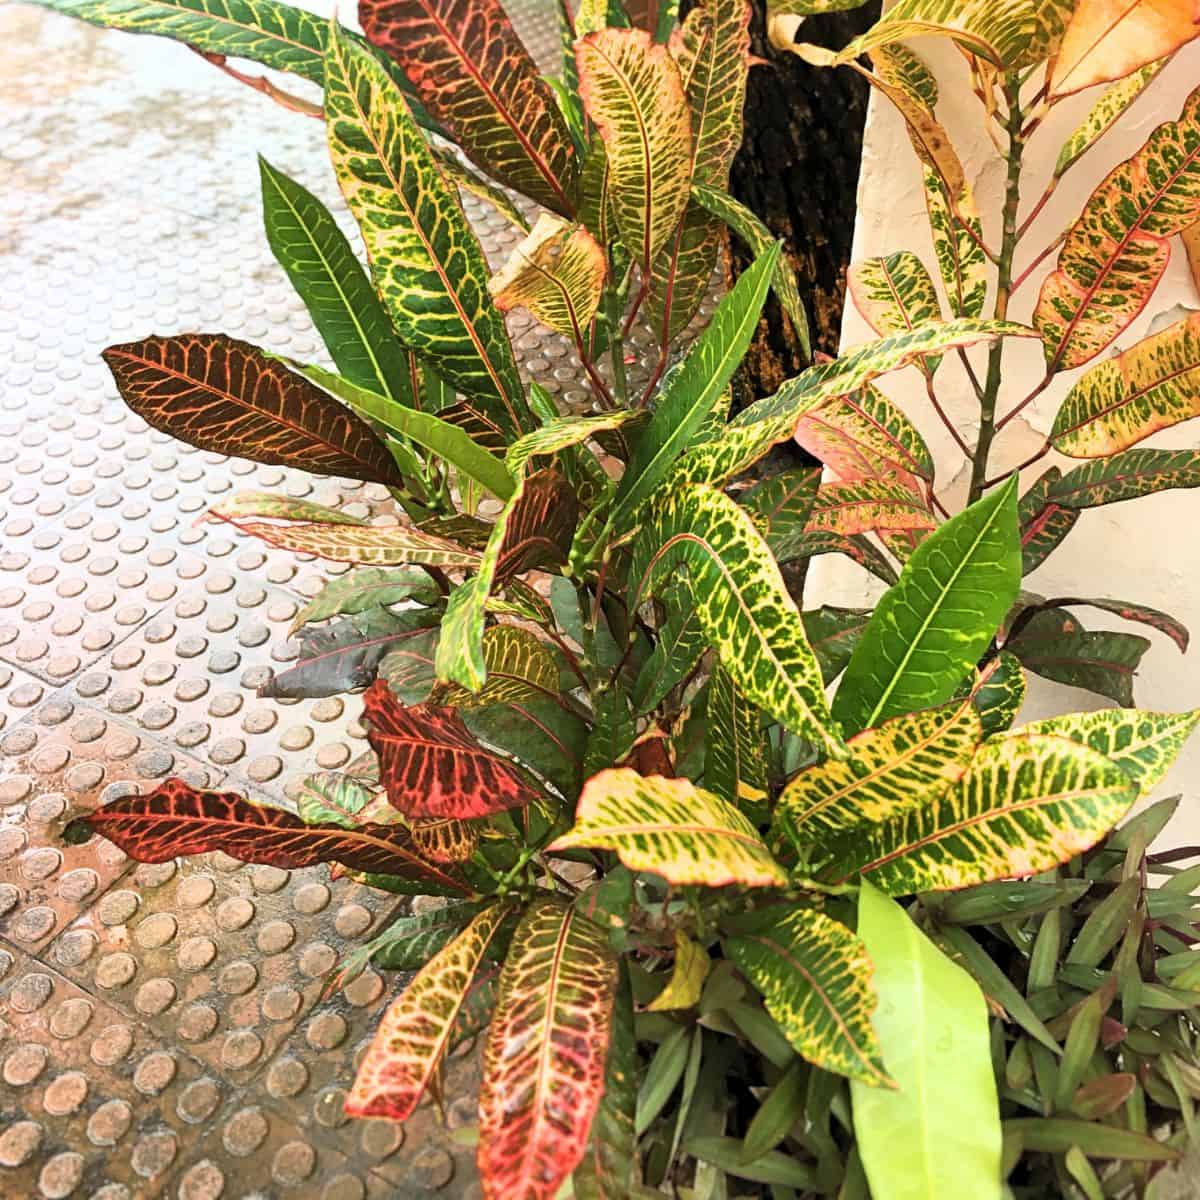 croton plant growing in natural light